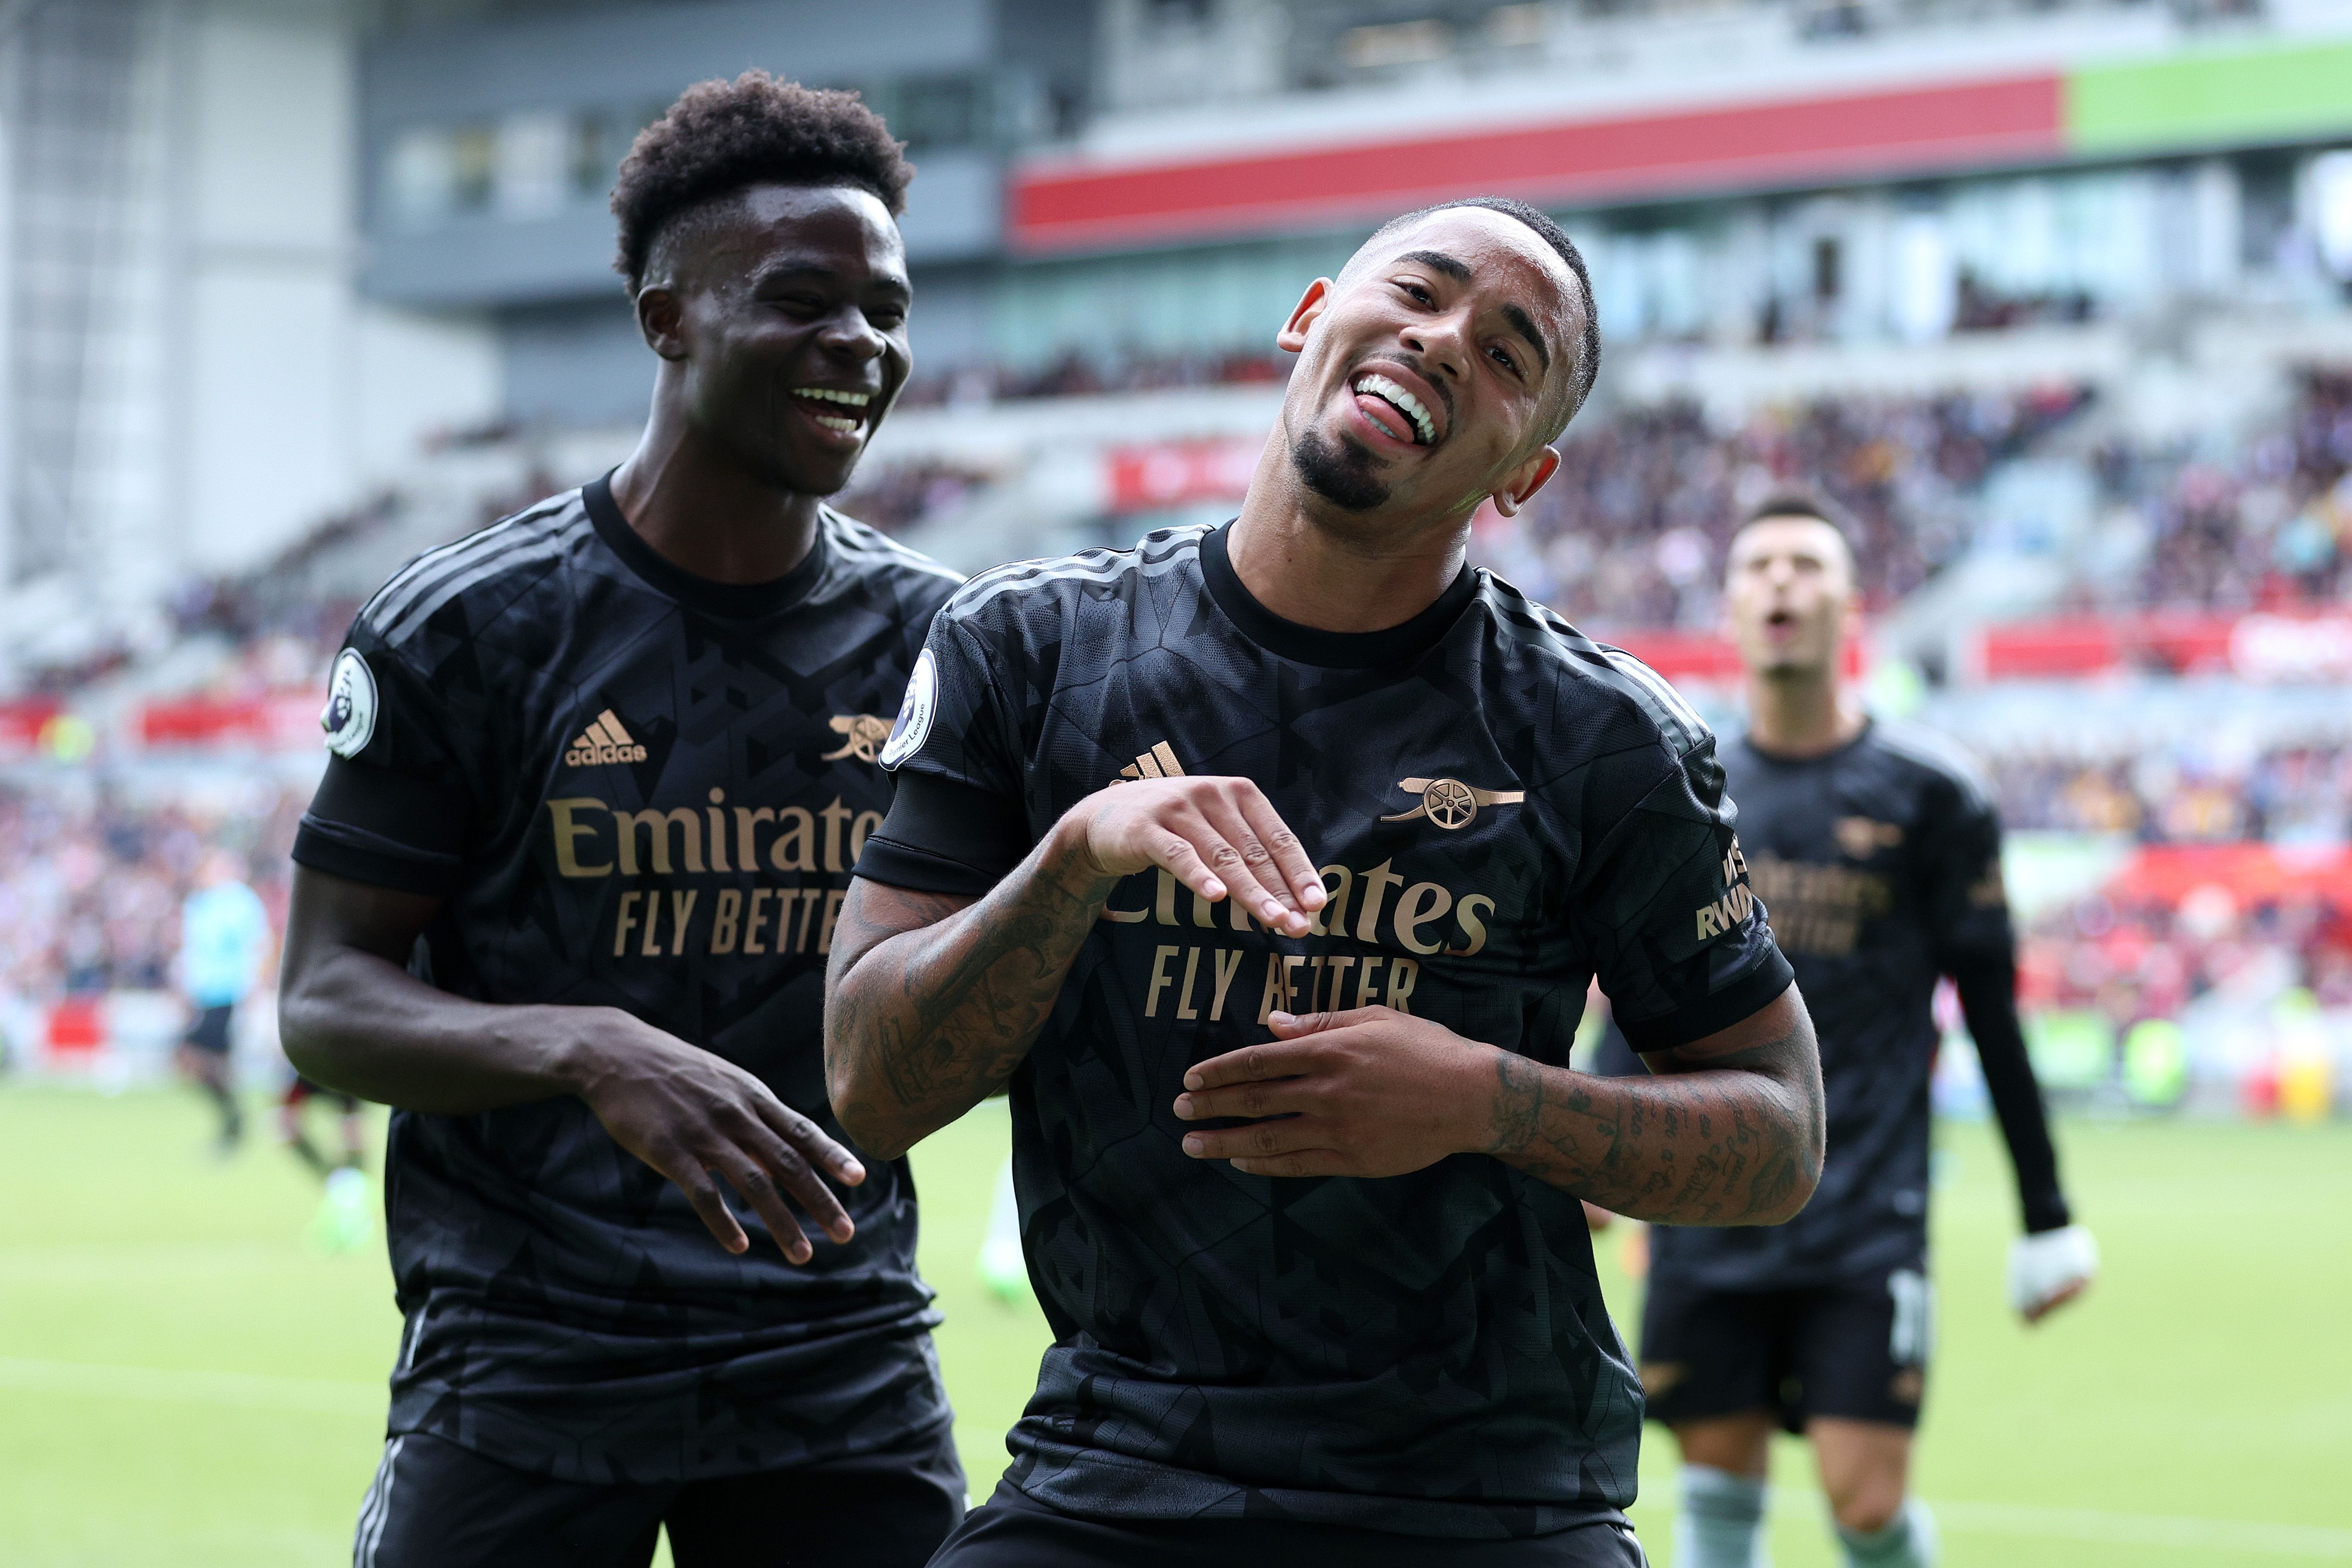 Gabriel Jesus of Arsenal celebrates scoring a goal during the Premier League match between Brentford FC and Arsenal FC at Brentford Community Stadium